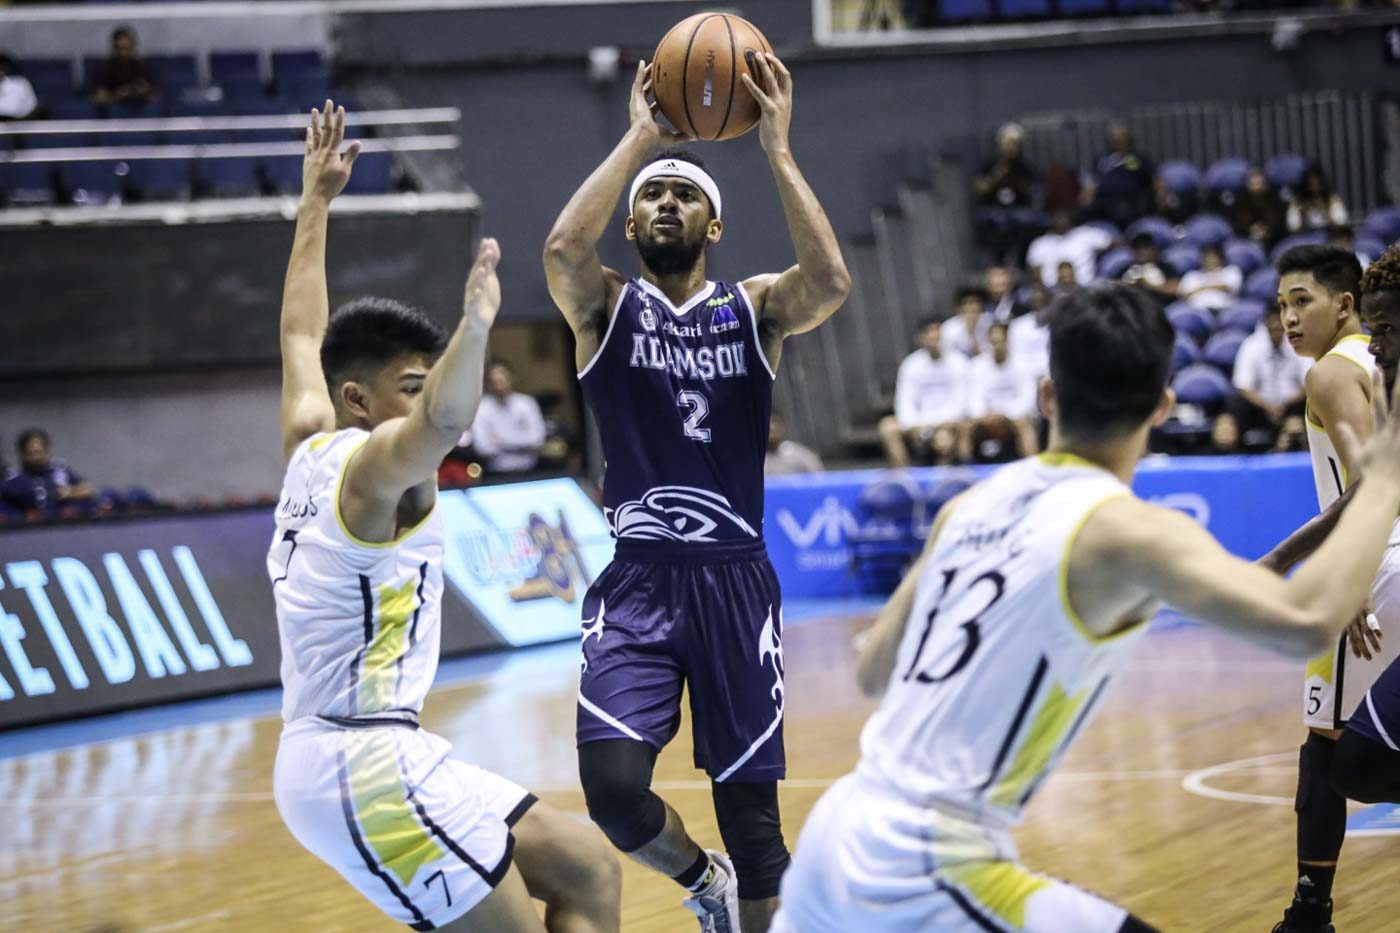 Adamson clinches Final Four berth in sweep of UST